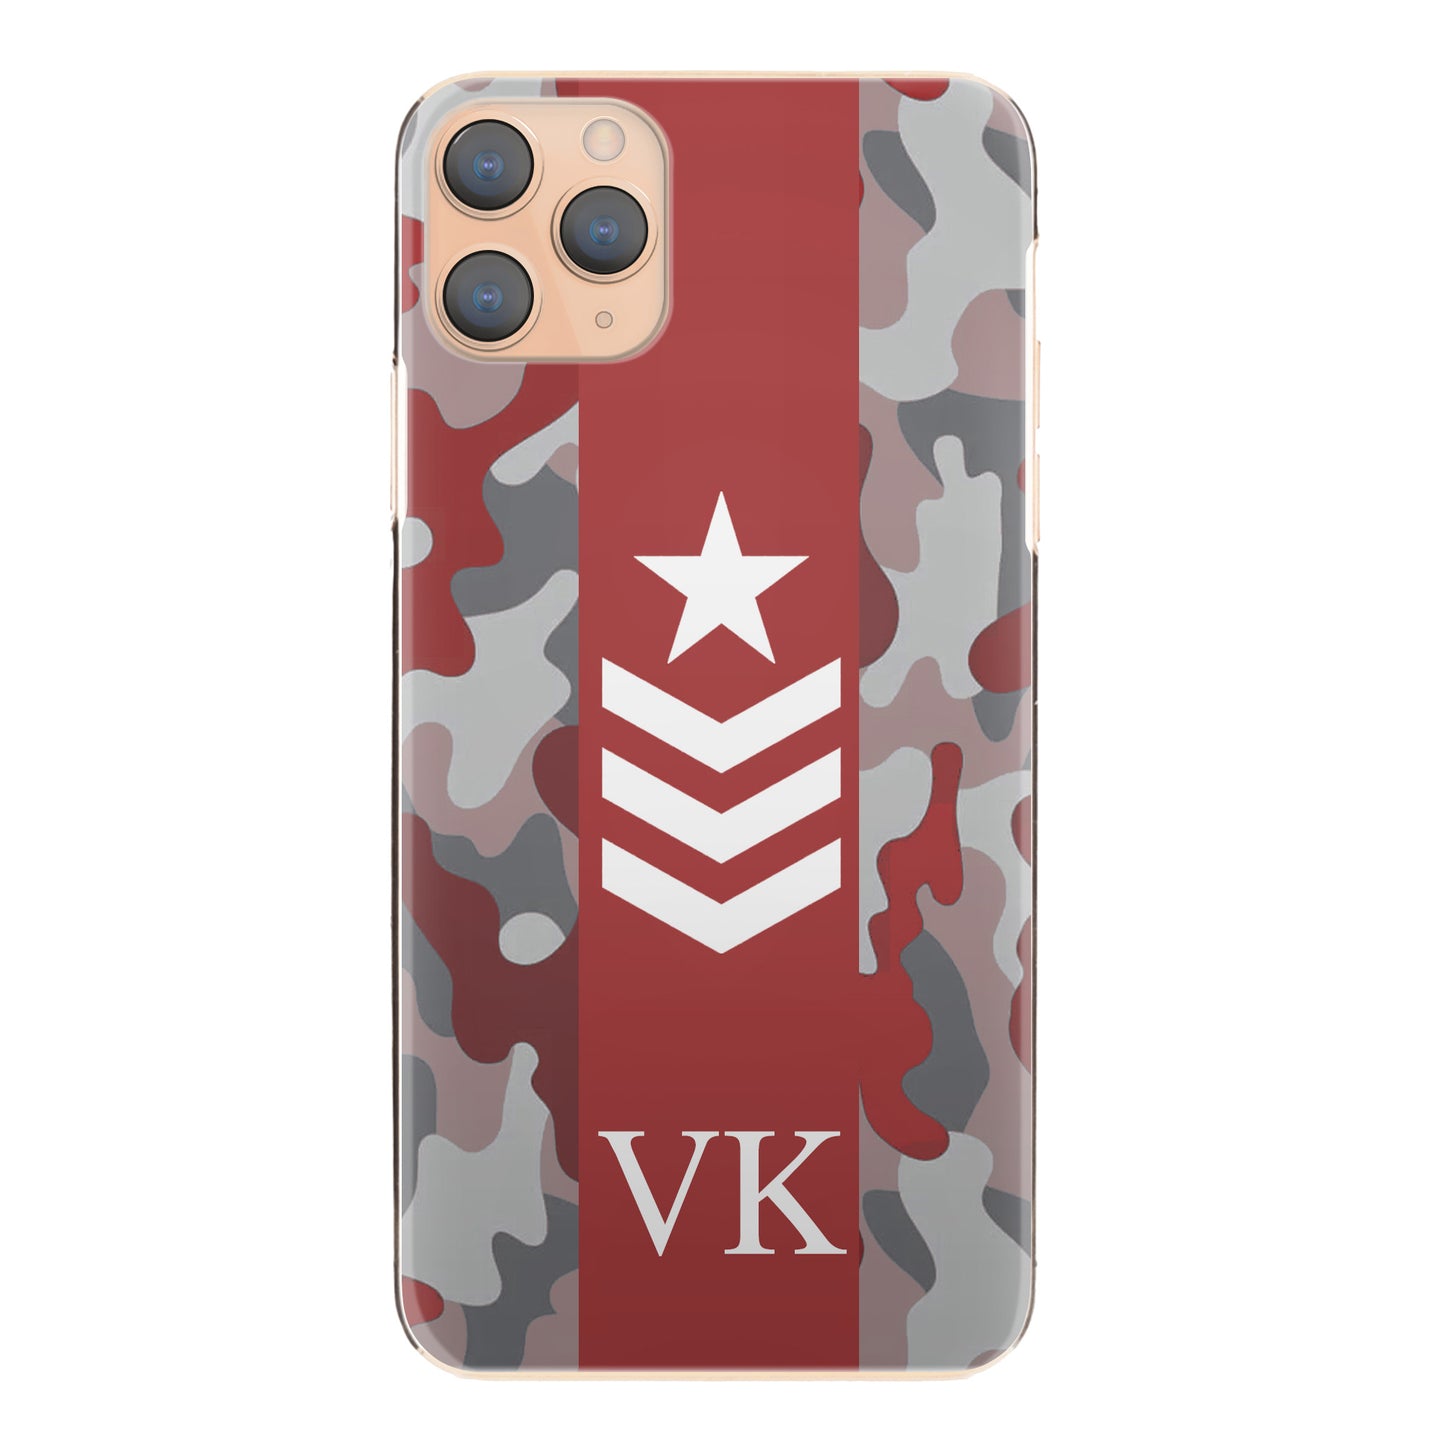 Personalised LG Phone Hard Case with Initials and Army Rank on Red Camo